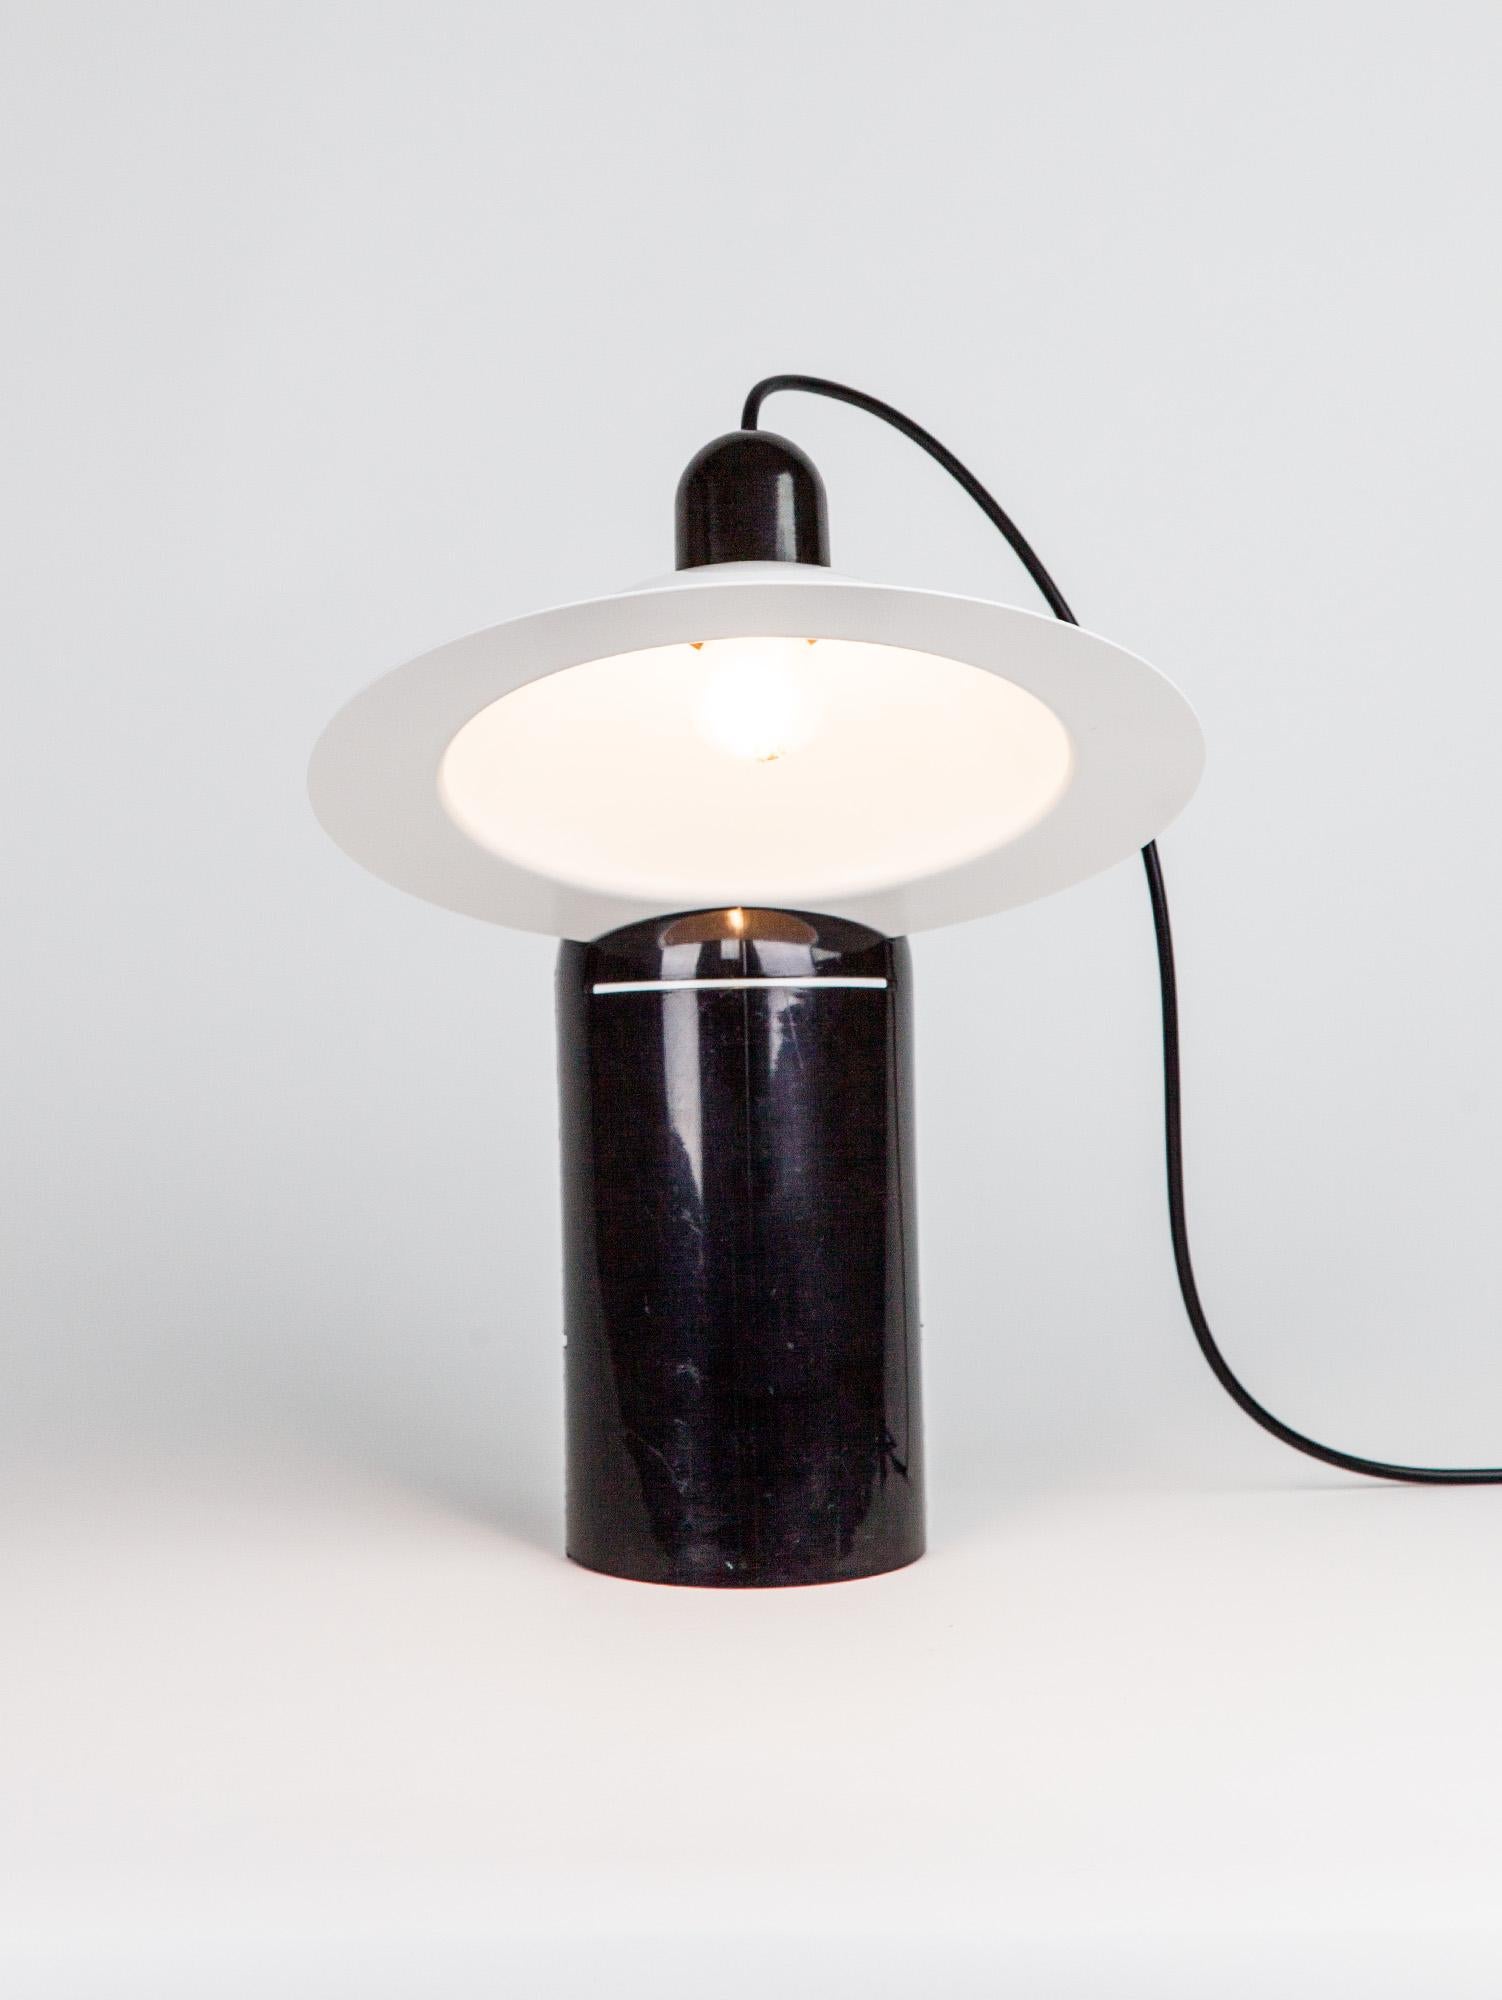 Playful Lampiatta table lamp designed by De Pas D'Urbino Lomazzi in 1971 for Stilnovo. Original vintage table lamp from the 1970s with a white aluminium shade and a heavy black plastic base. The clever design of the shade can be positioned by